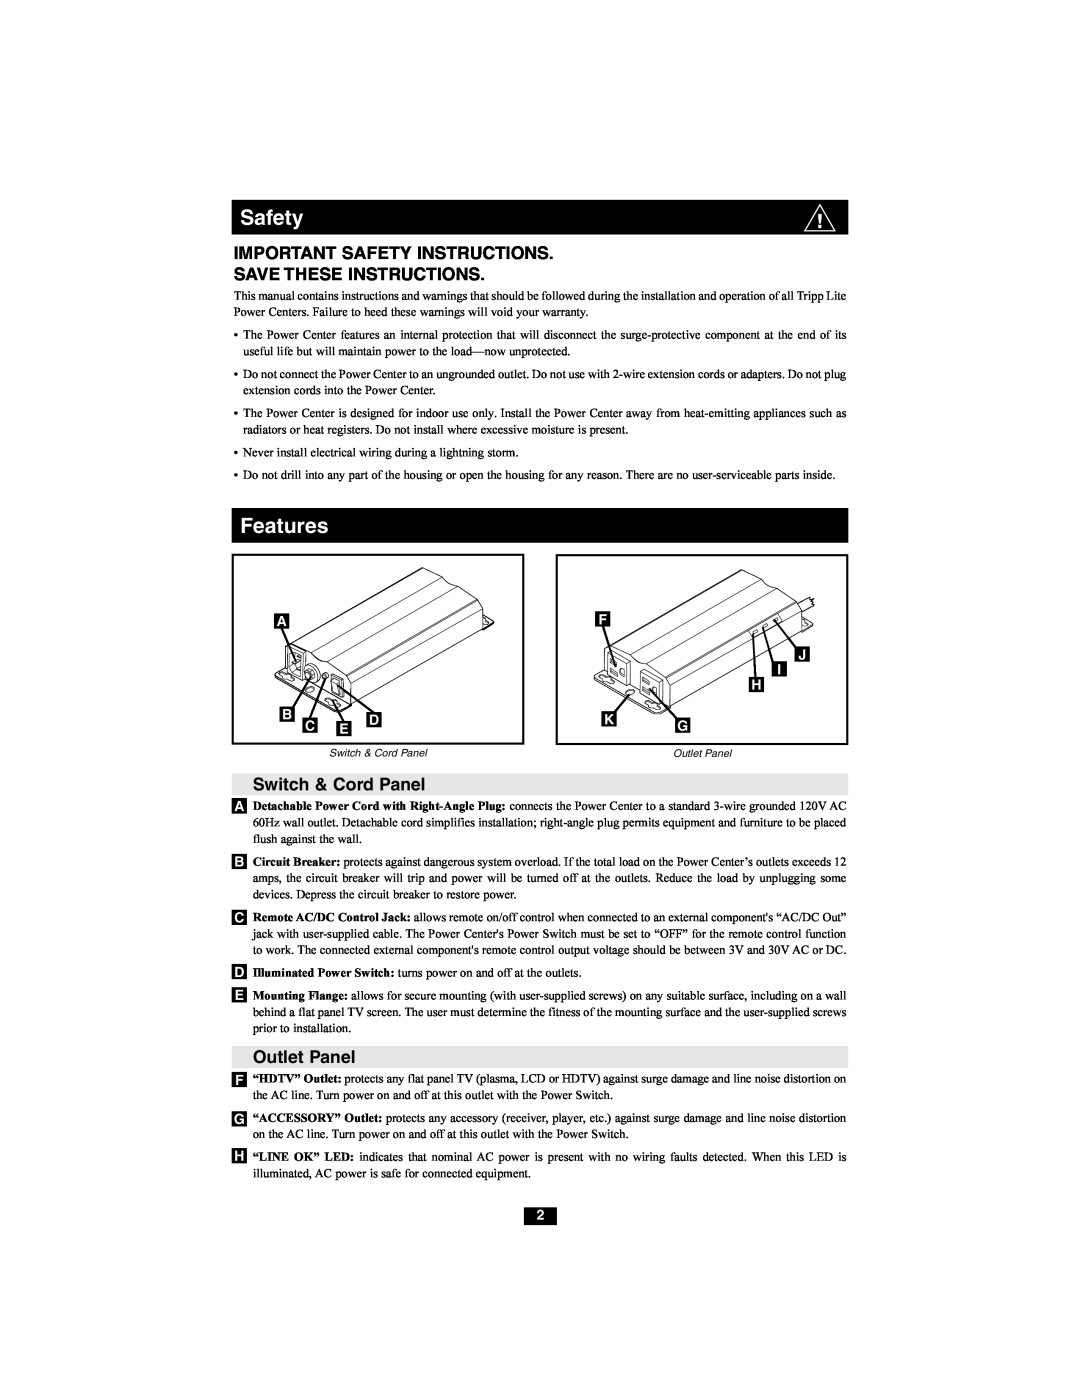 Tripp Lite HT2210ISOCTR Important Safety Instructions Save These Instructions, Switch & Cord Panel, Outlet Panel, Features 